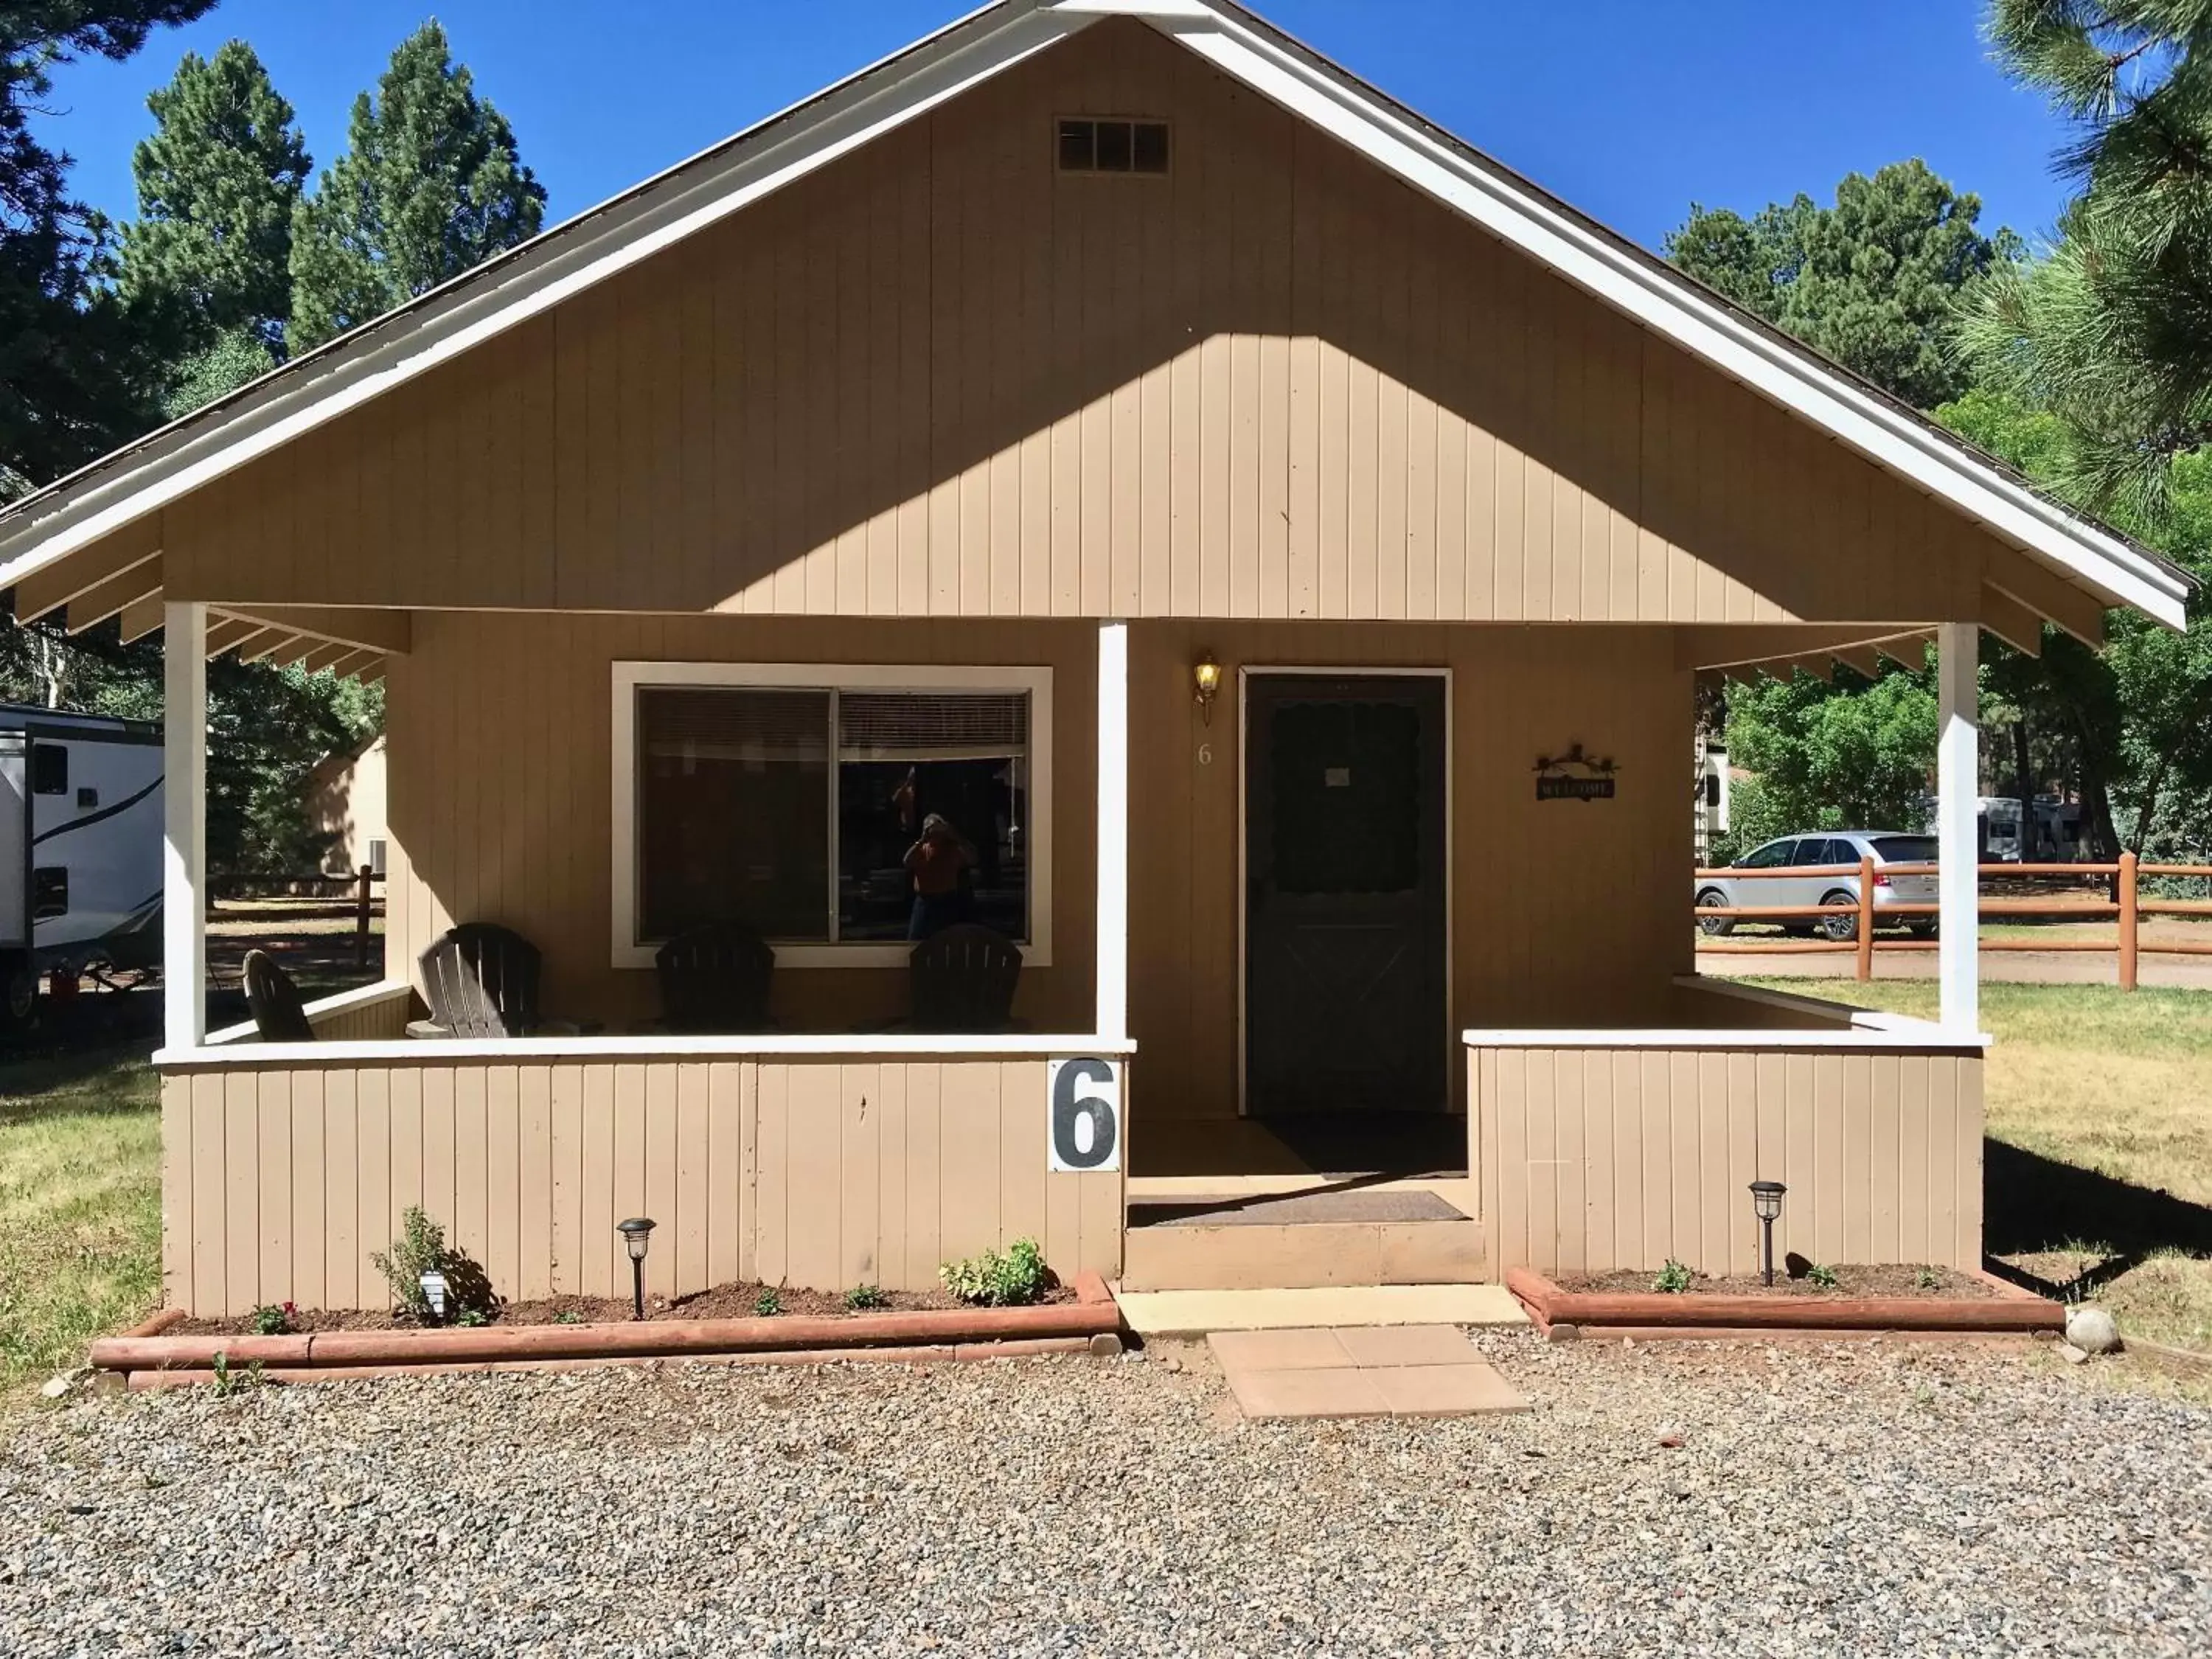 Property building in JW Vallecito